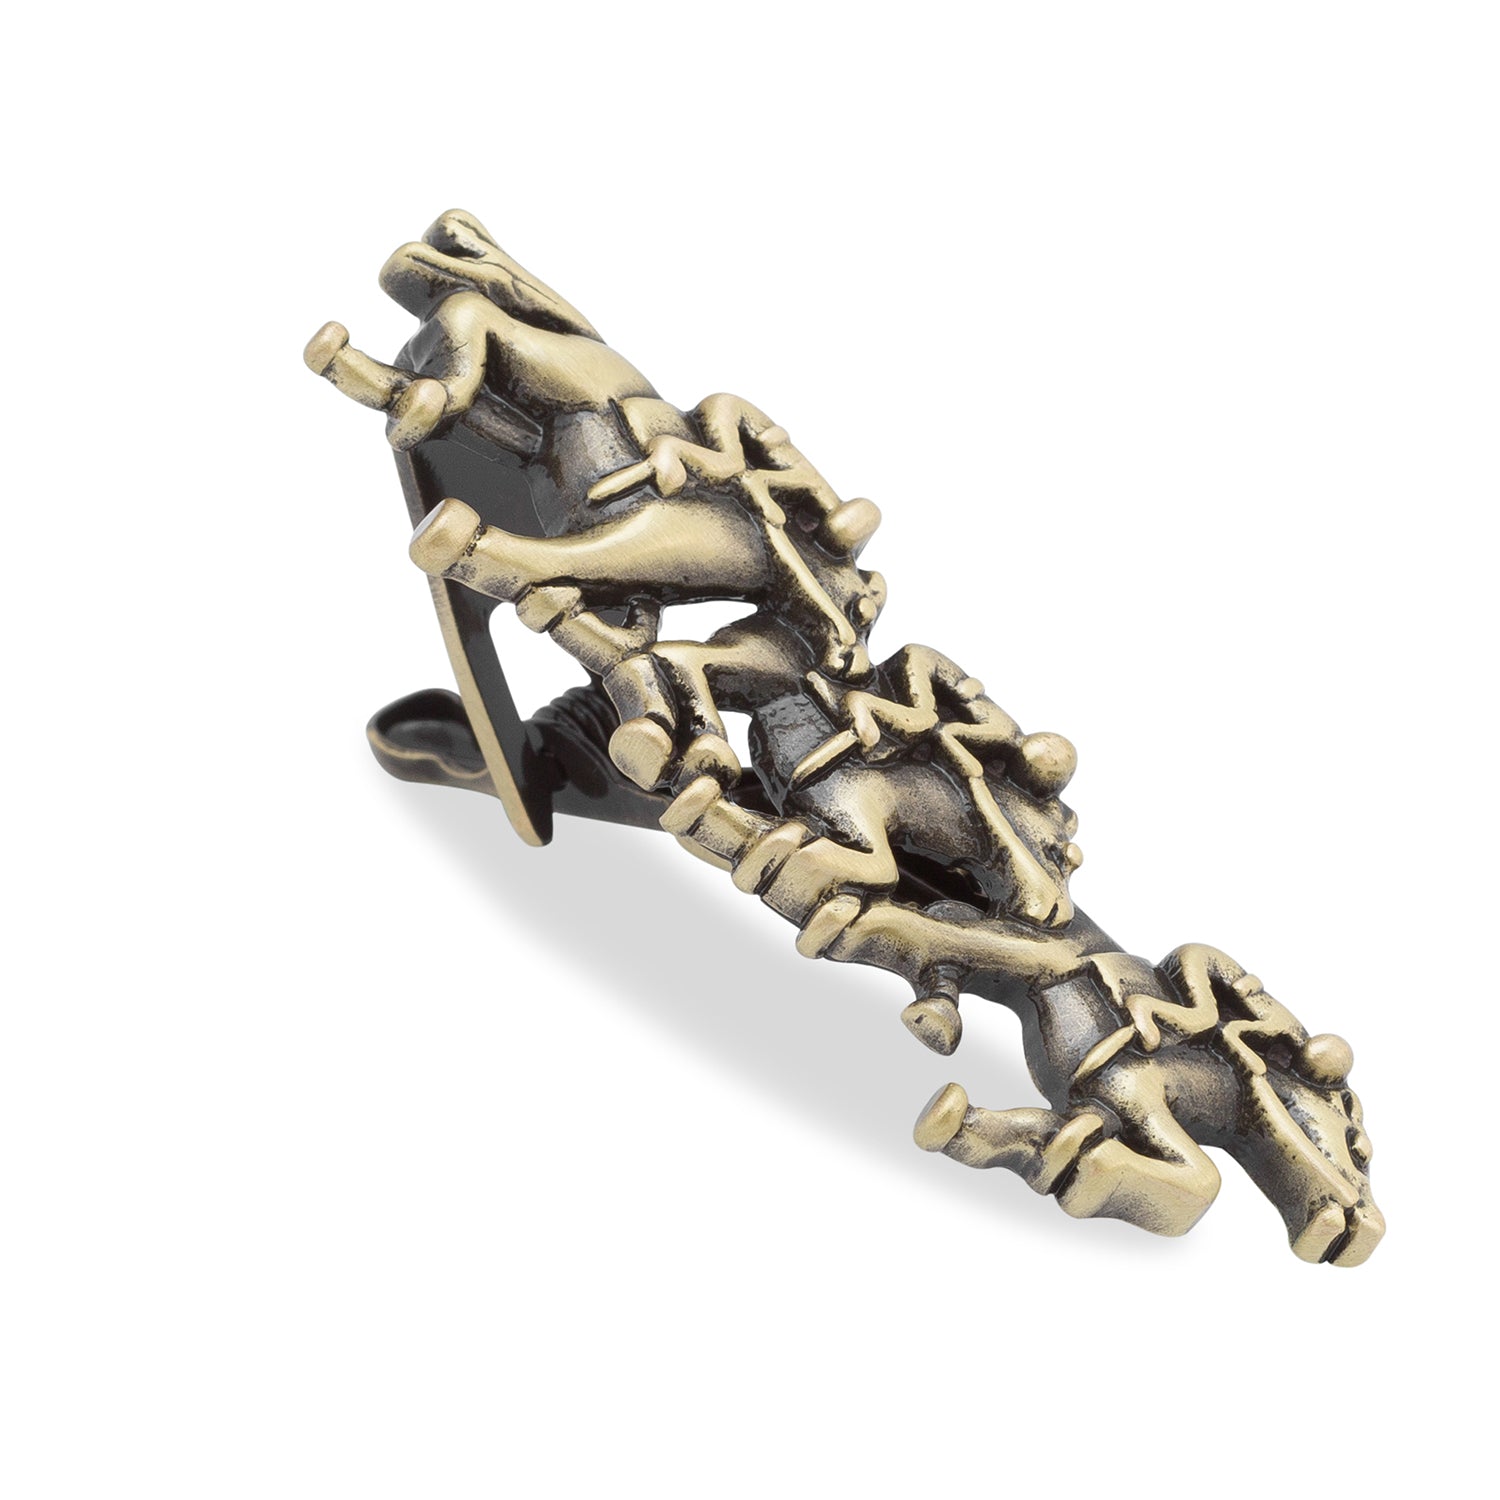 Off to The Races Antique Brass Tie Bar